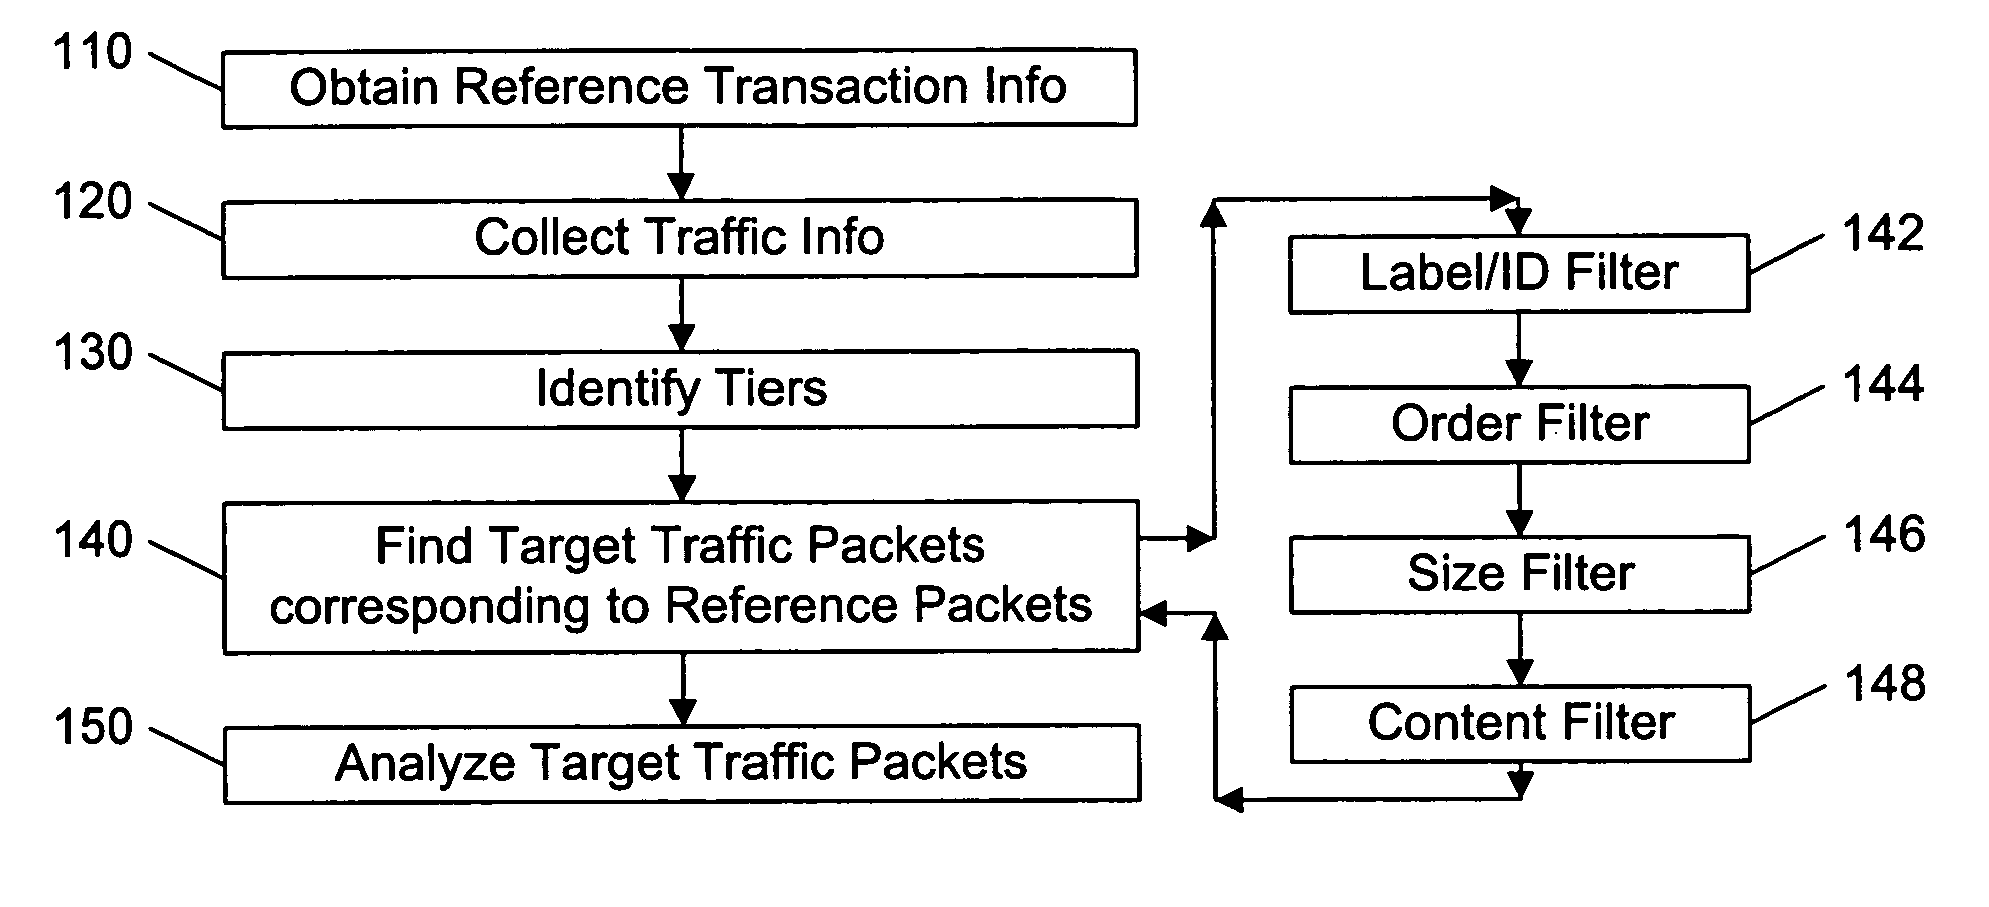 Packet tracing